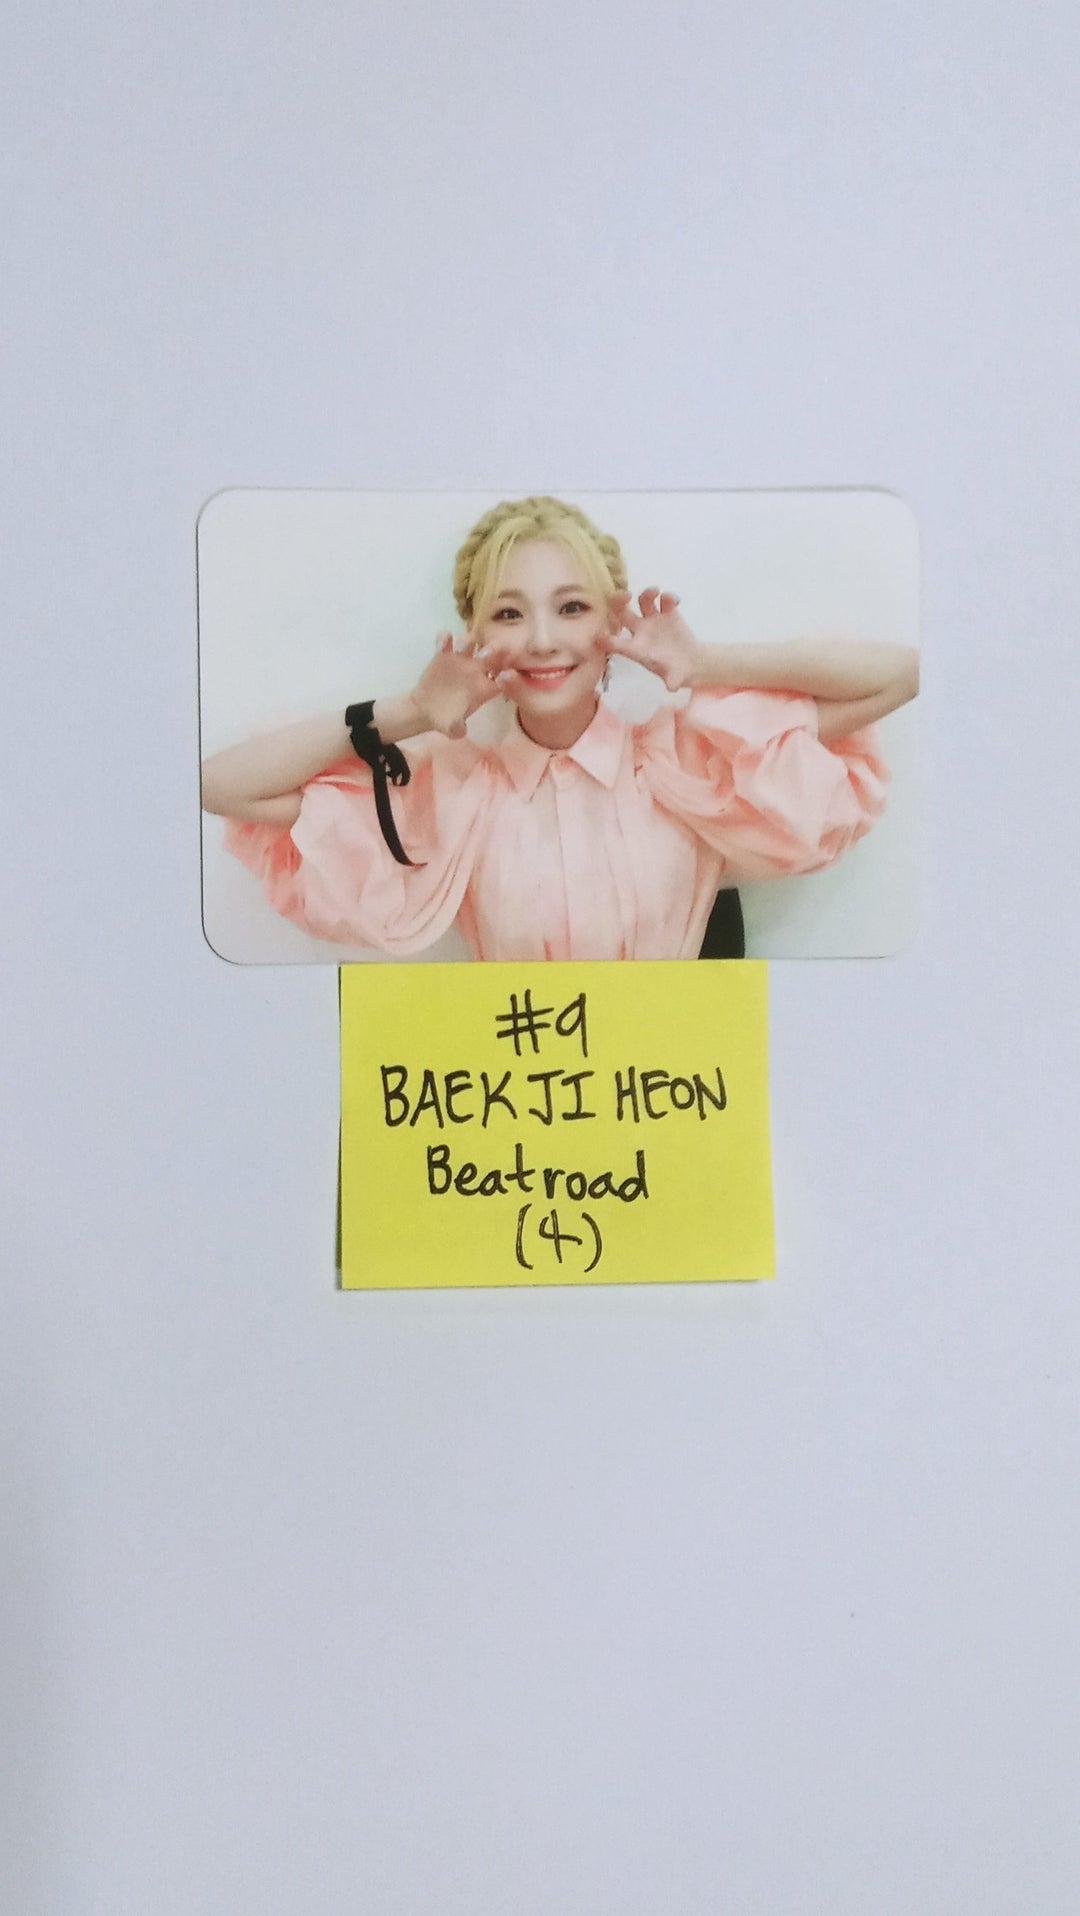 Fromis_9 "9 Way Ticket" -Beatroad Fan Sign Event Photocard